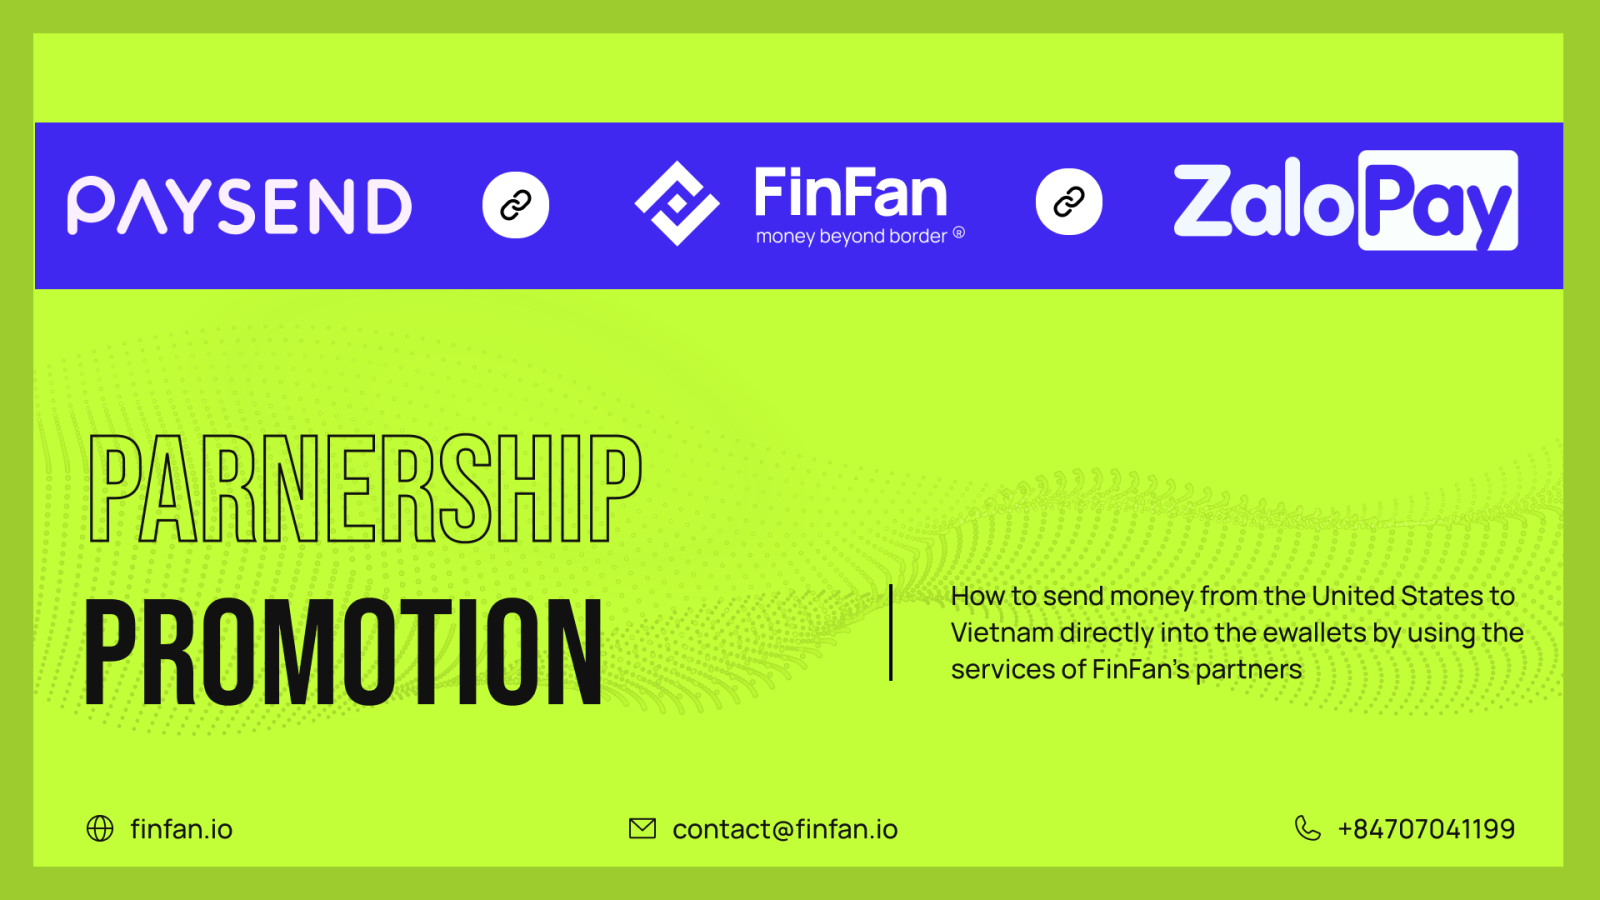 How to send money from the United States to Vietnam directly into the ewallets by using the services of FinFan’s partners – Paysend and Zalo Pay